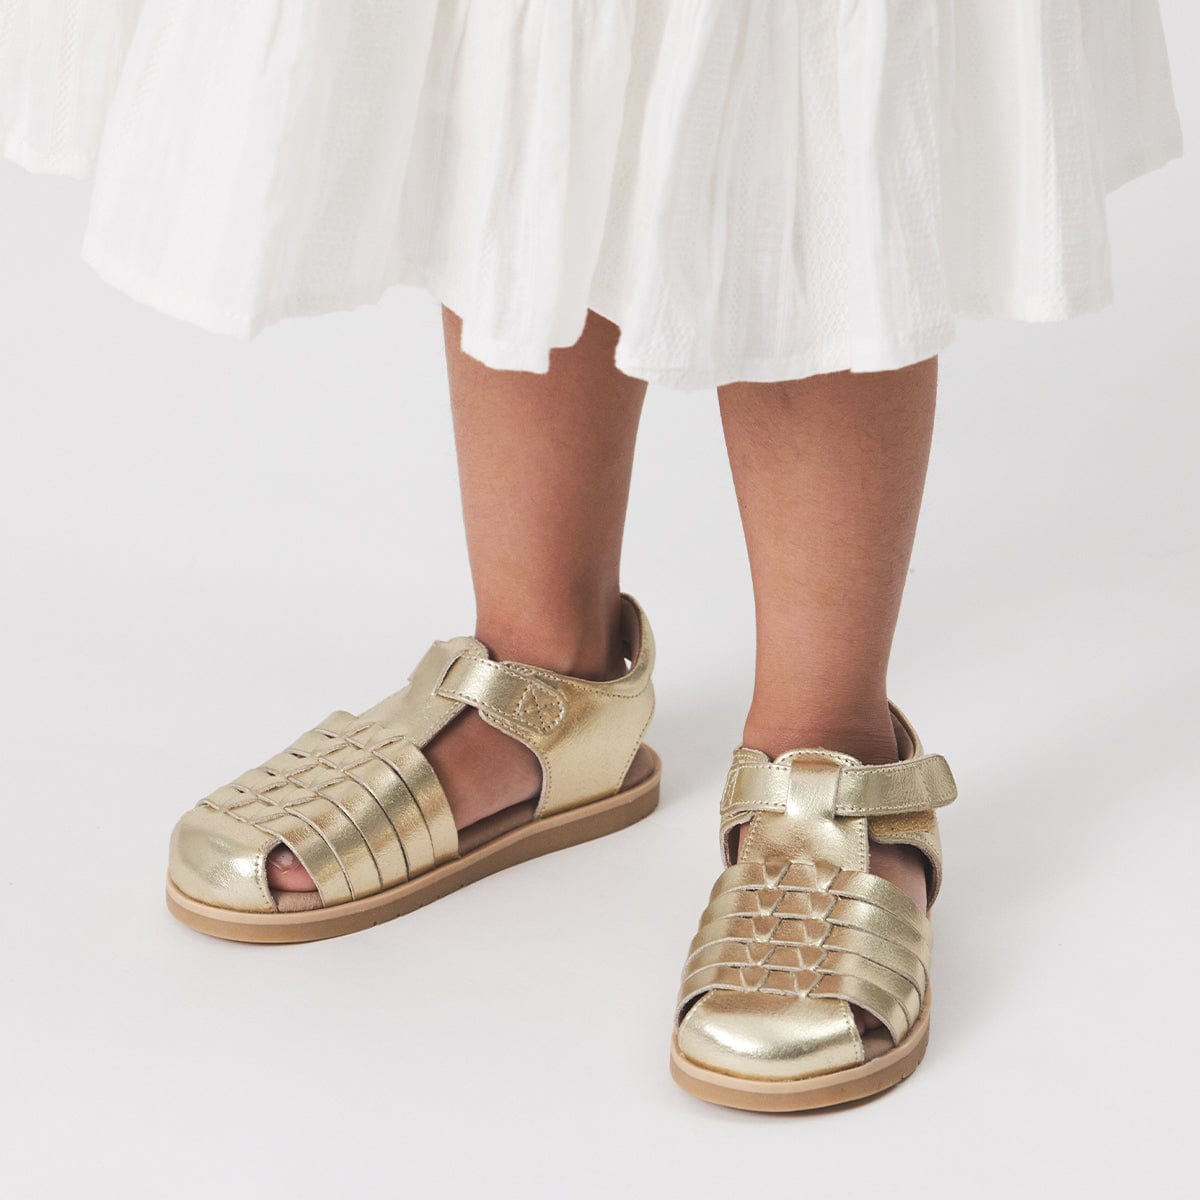 Pretty Brave Girls Shoes Frankie Sandal in Gold